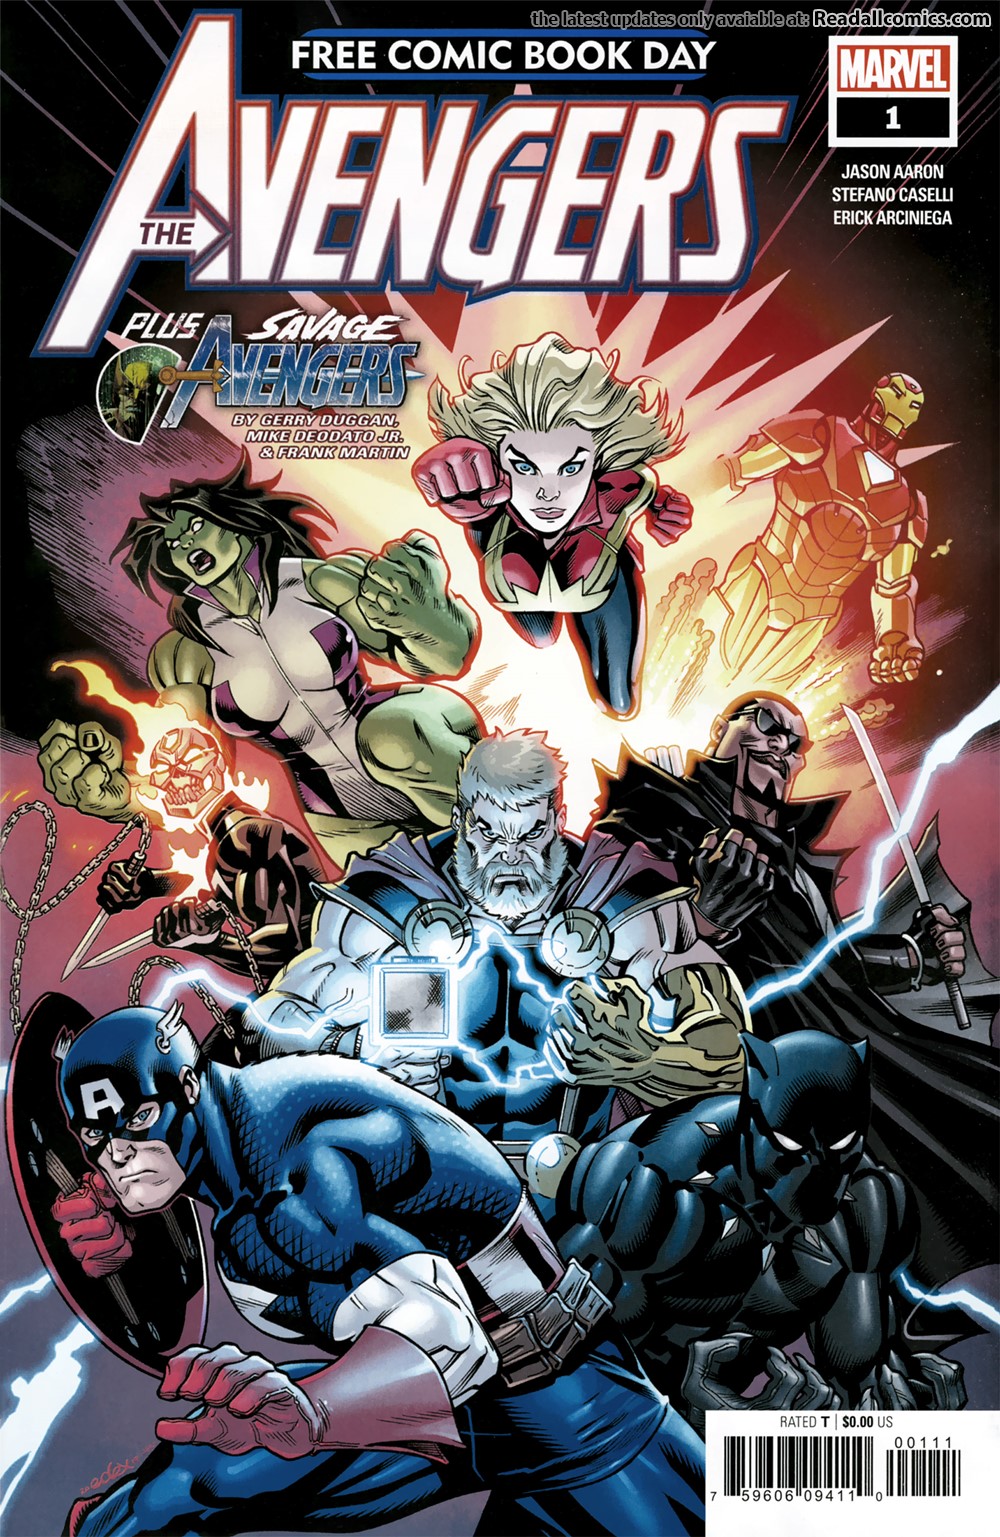 Free Comic Book Day 2019 Avengers Fcbd | Read Free Comic Book Day 2019  Avengers Fcbd comic online in high quality. Read Full Comic online for free  - Read comics online in